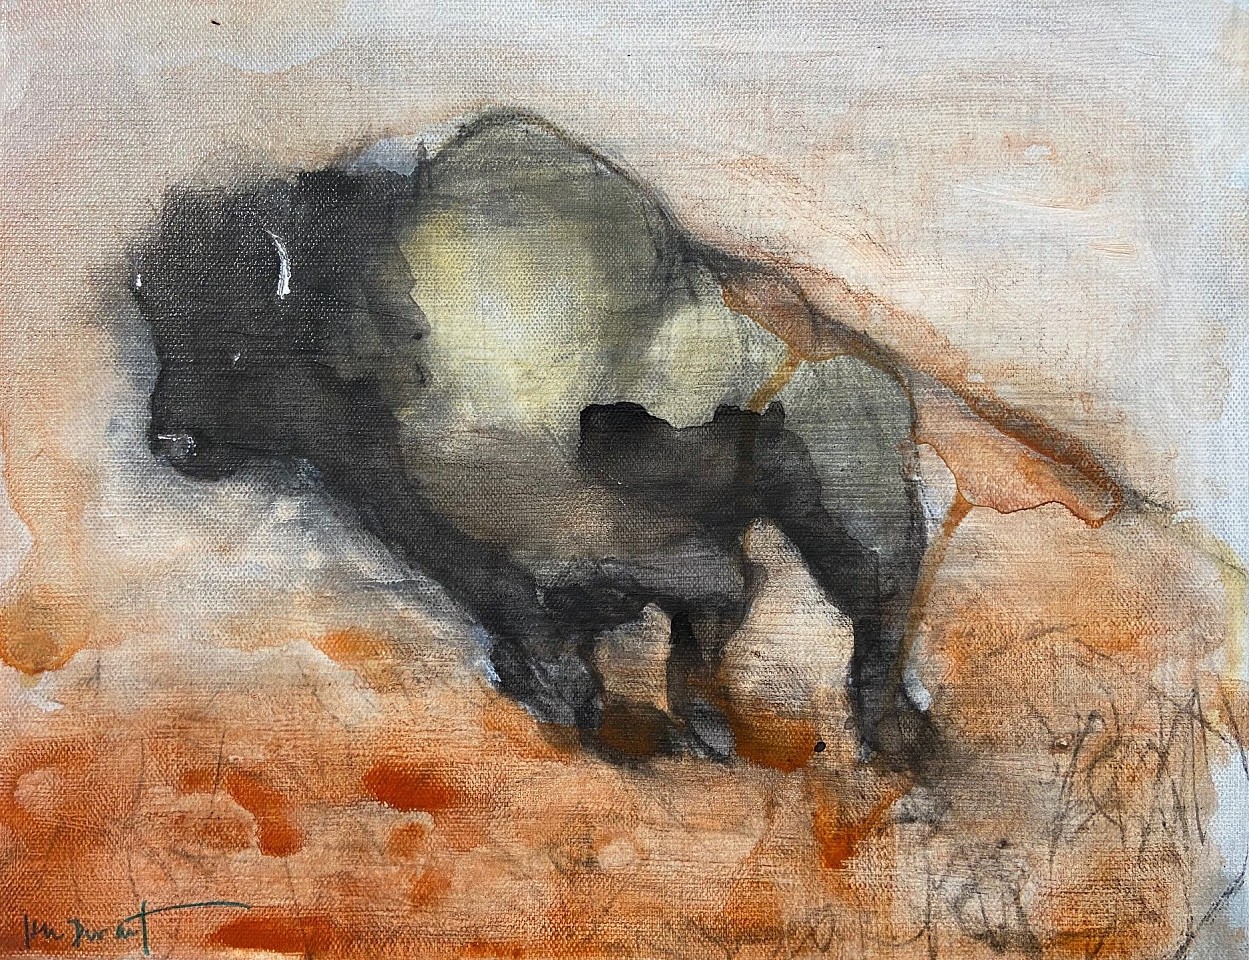 Helen Durant, Breaking Away, 2020
Charcoal and Acrylic on Canvas, 11 x 14 in. (27.9 x 35.6 cm)
SOLD
7498